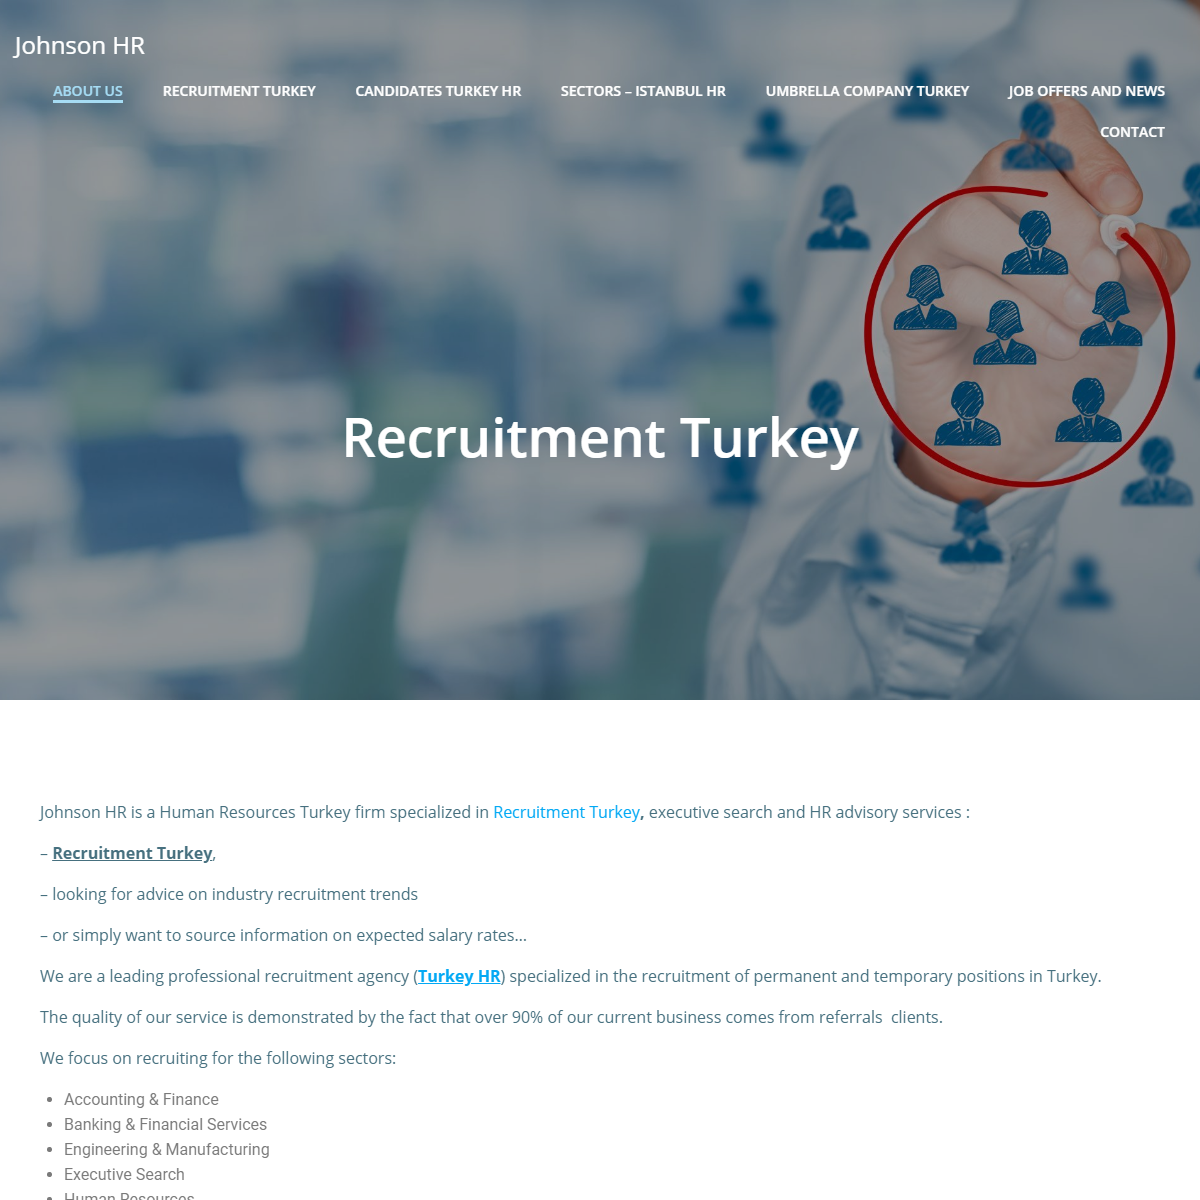 A complete backup of https://www.recruitment-turkey.com/